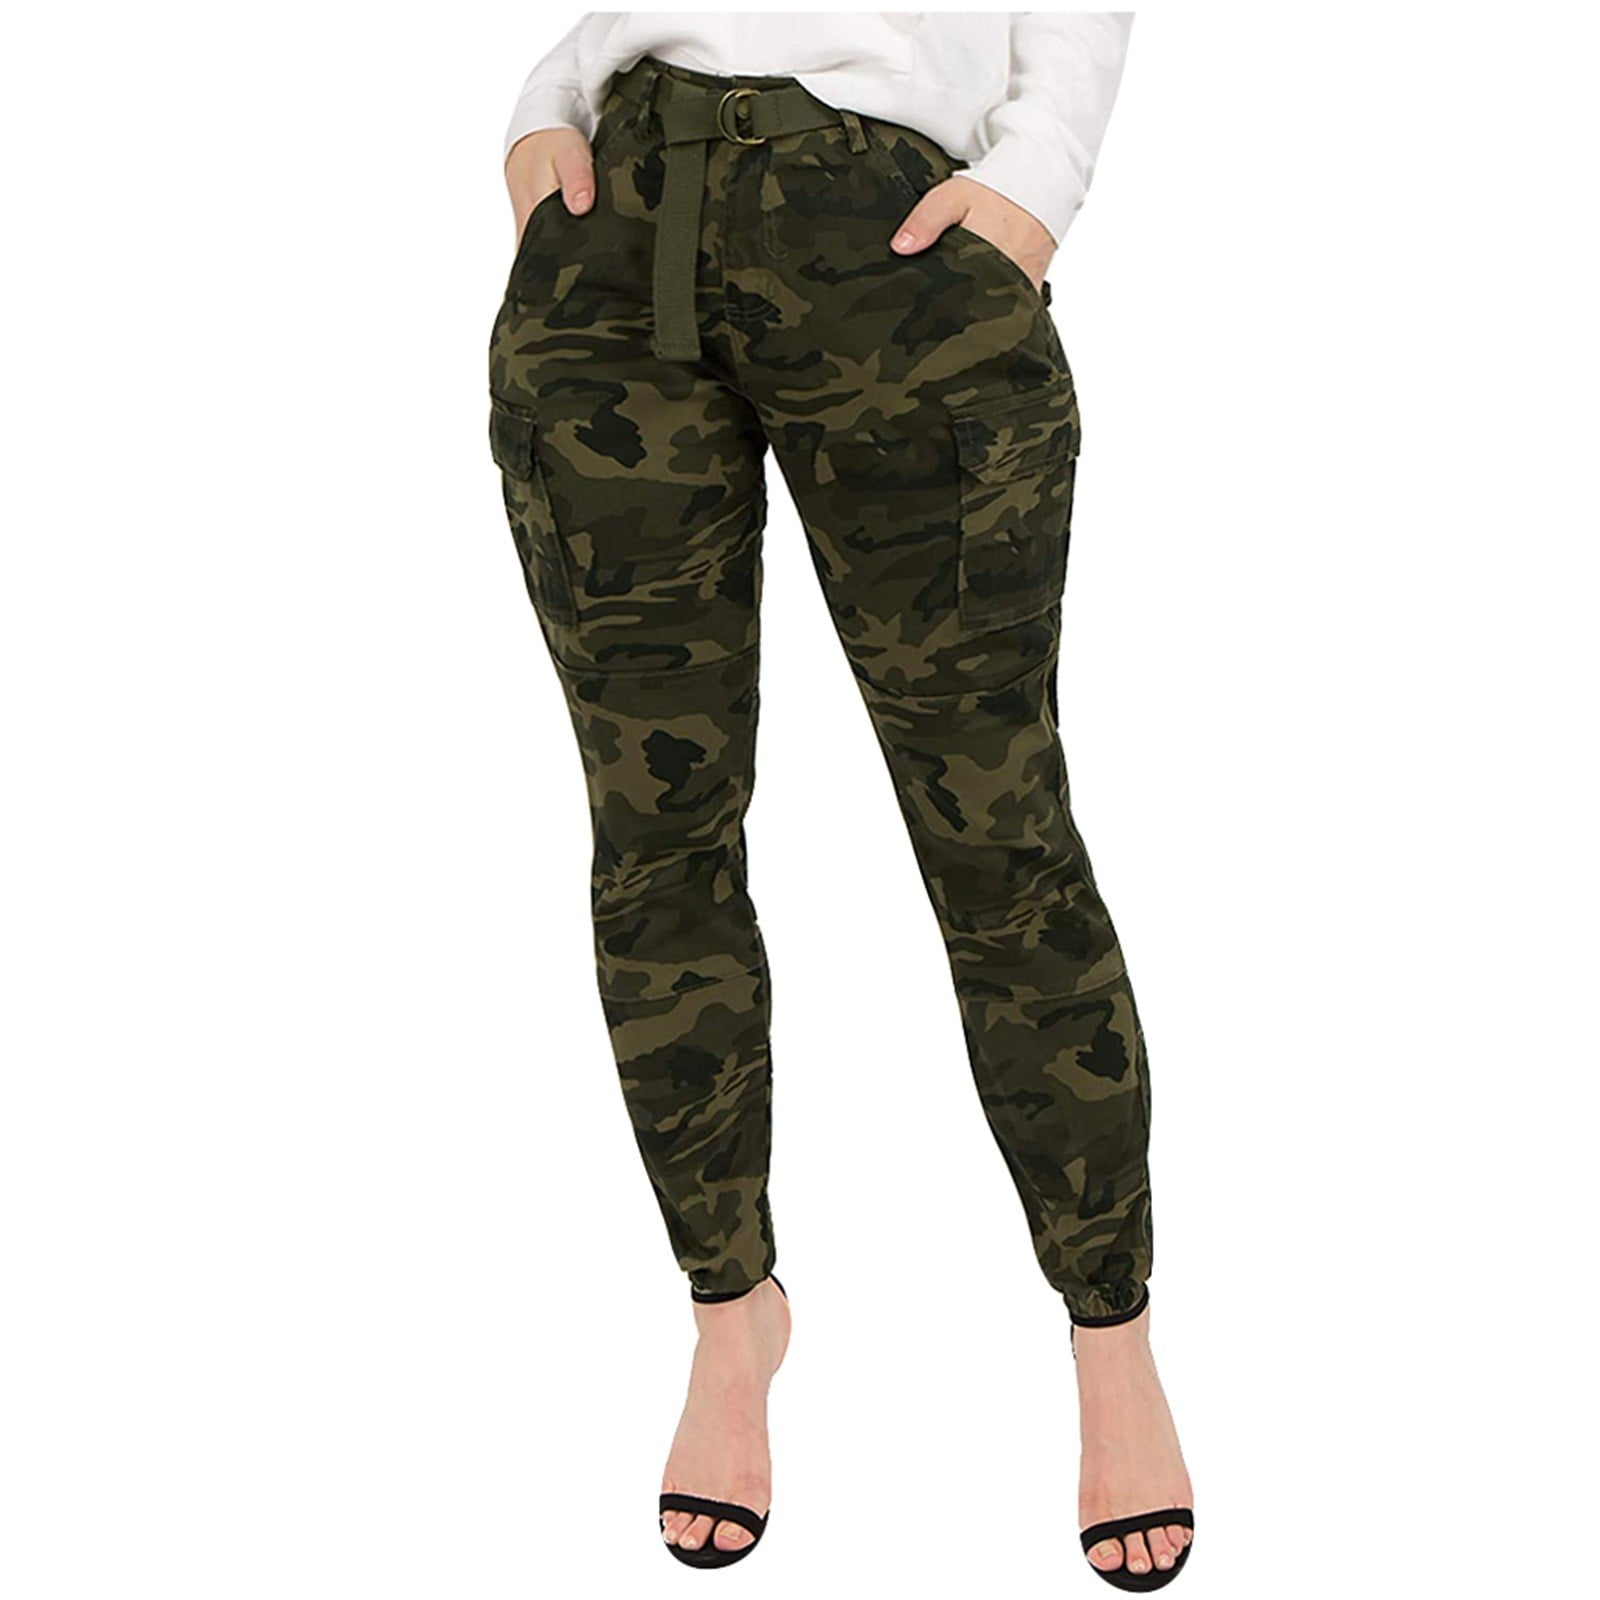 Plus Size Camo Print Cargo Pants With Side Pockets Mid Waist Casual Army  Pants Women For Leisure And Everyday Wear From Zsmyclothes, $20.46